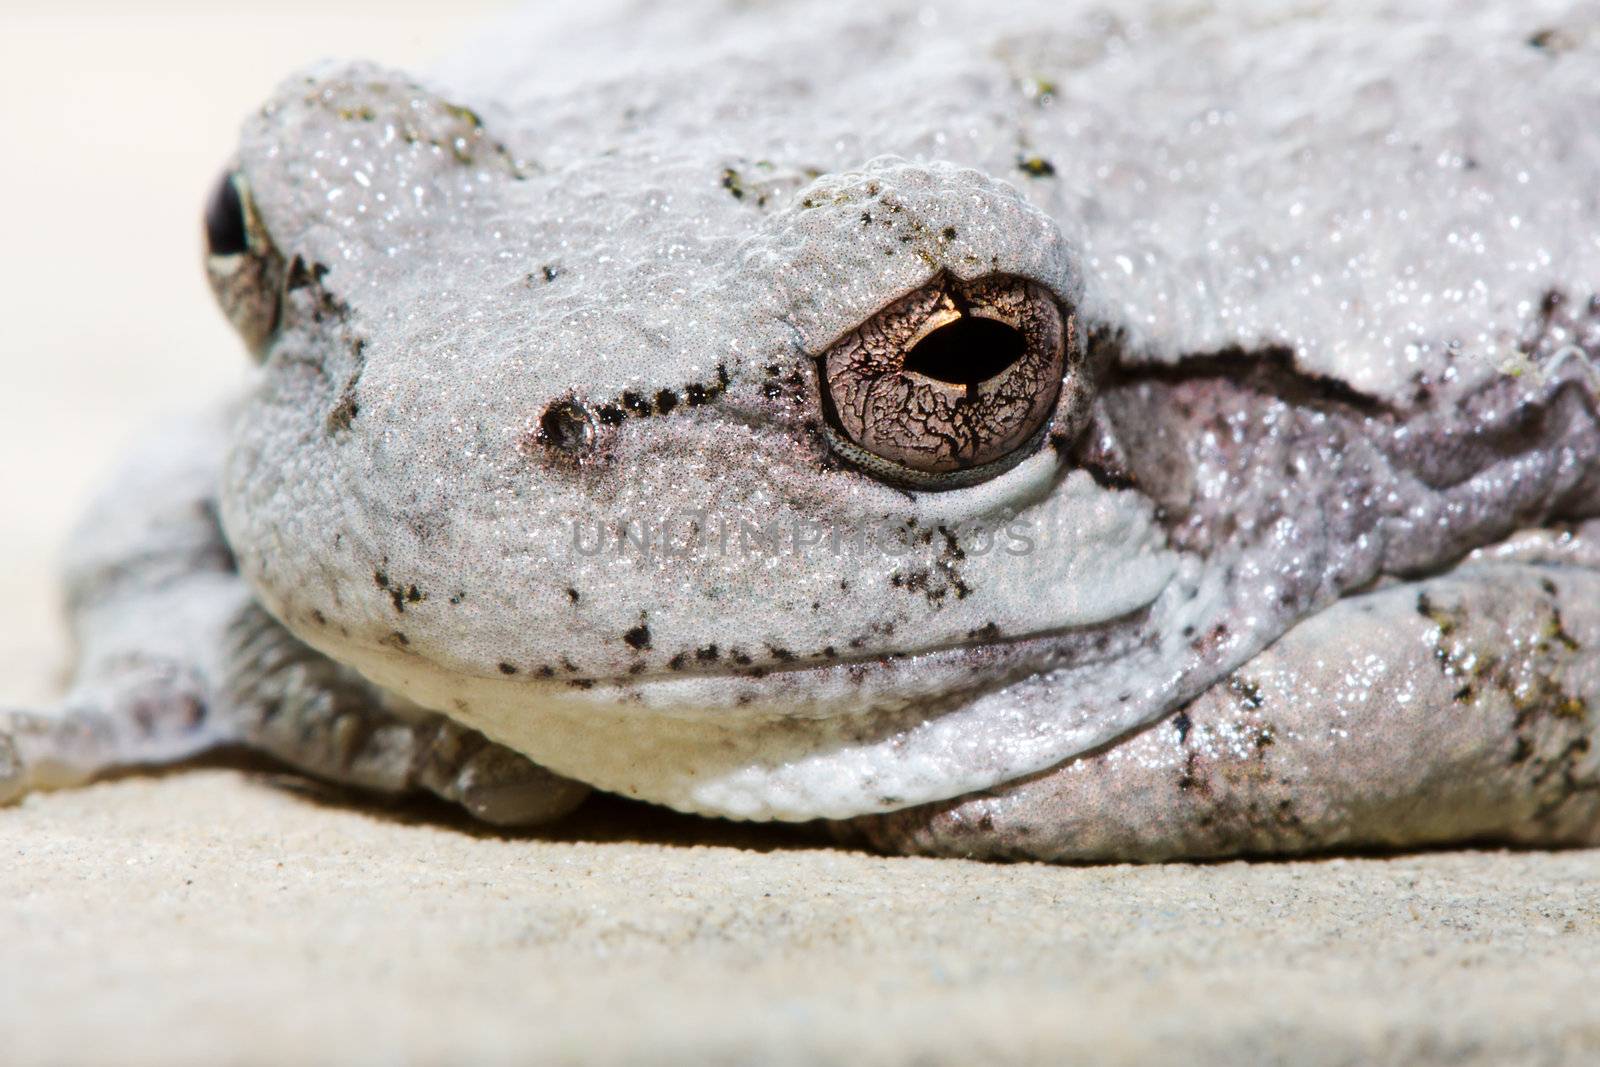 Cope's Gray Tree Frog resting on a ledge.